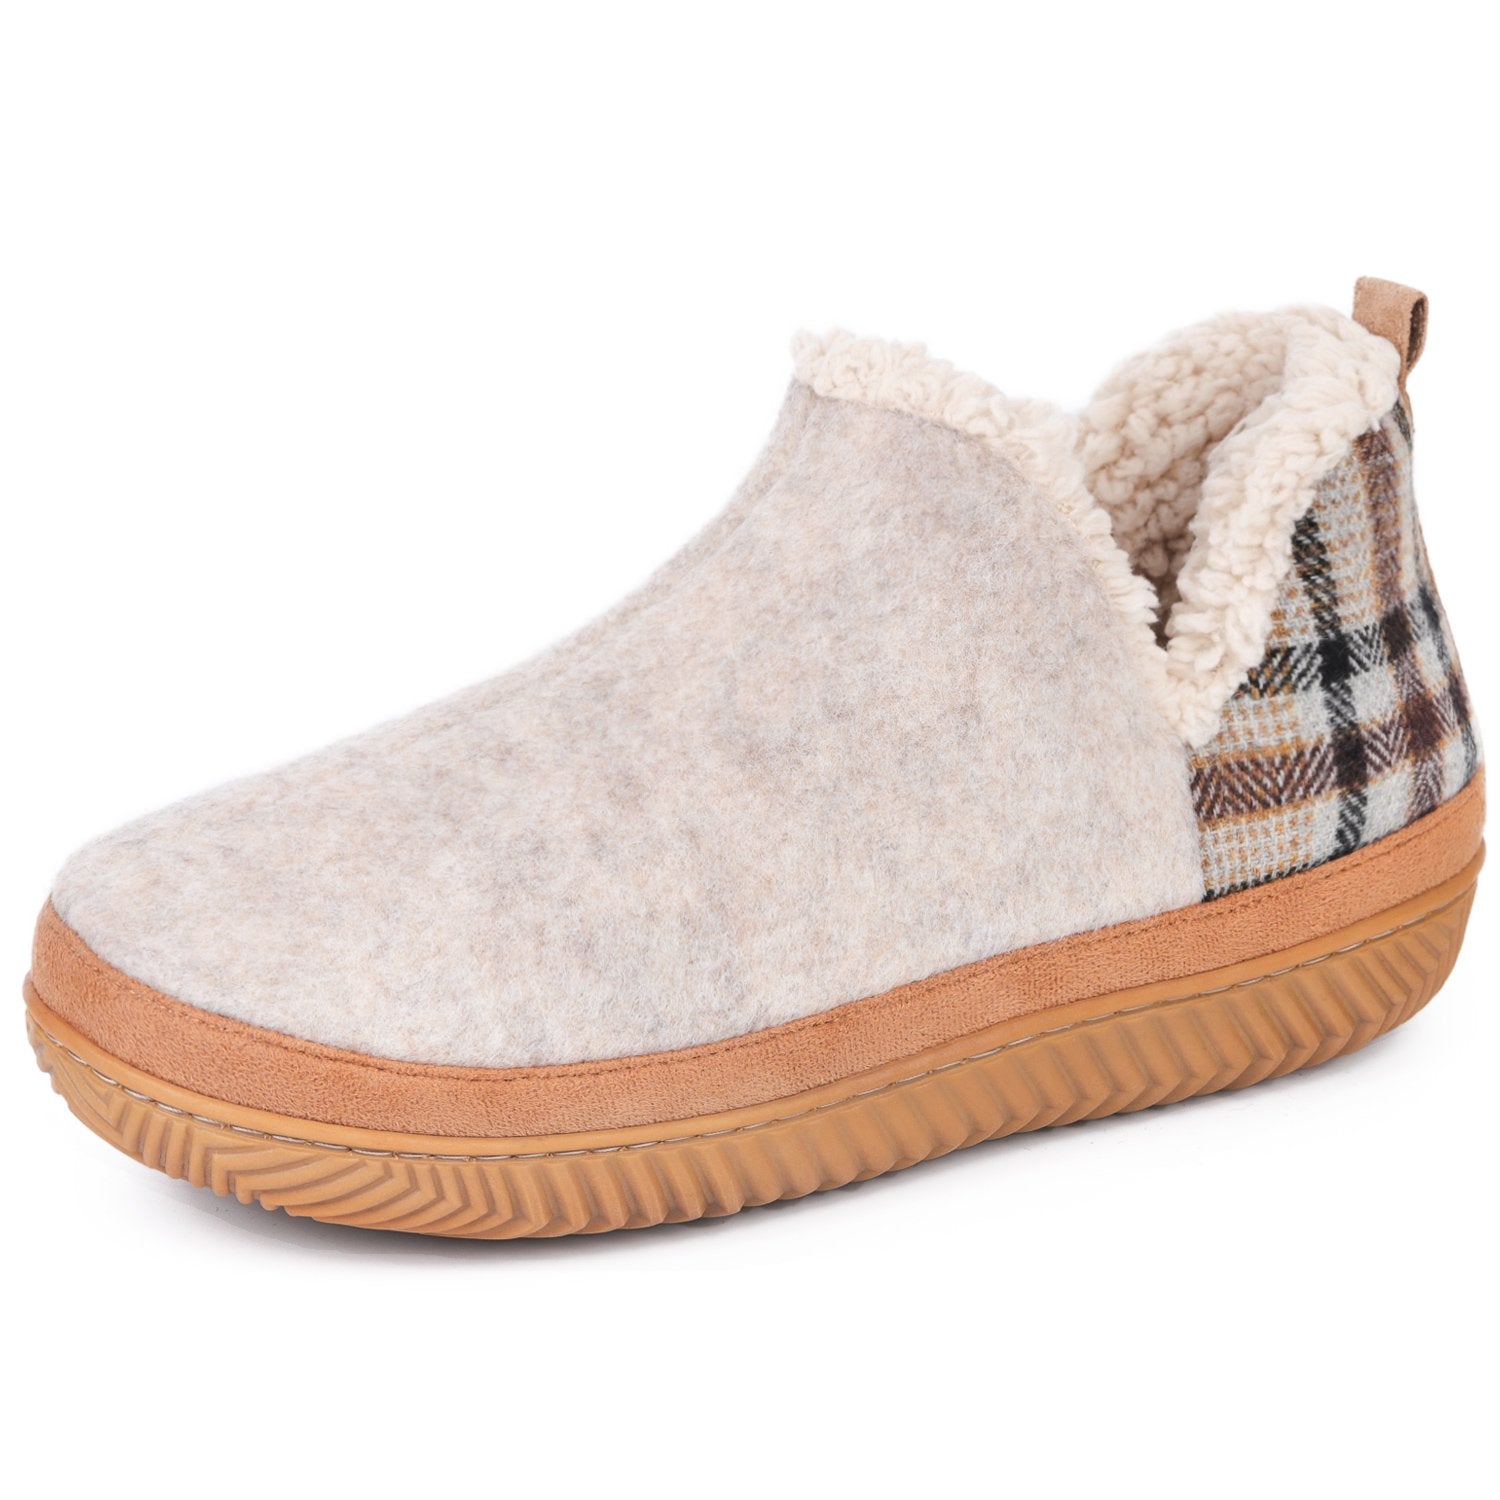 HomeTop Ladies' Micro Suede Hi-Top Ankle Boot Slippers with Sheepskin Classic Plaid